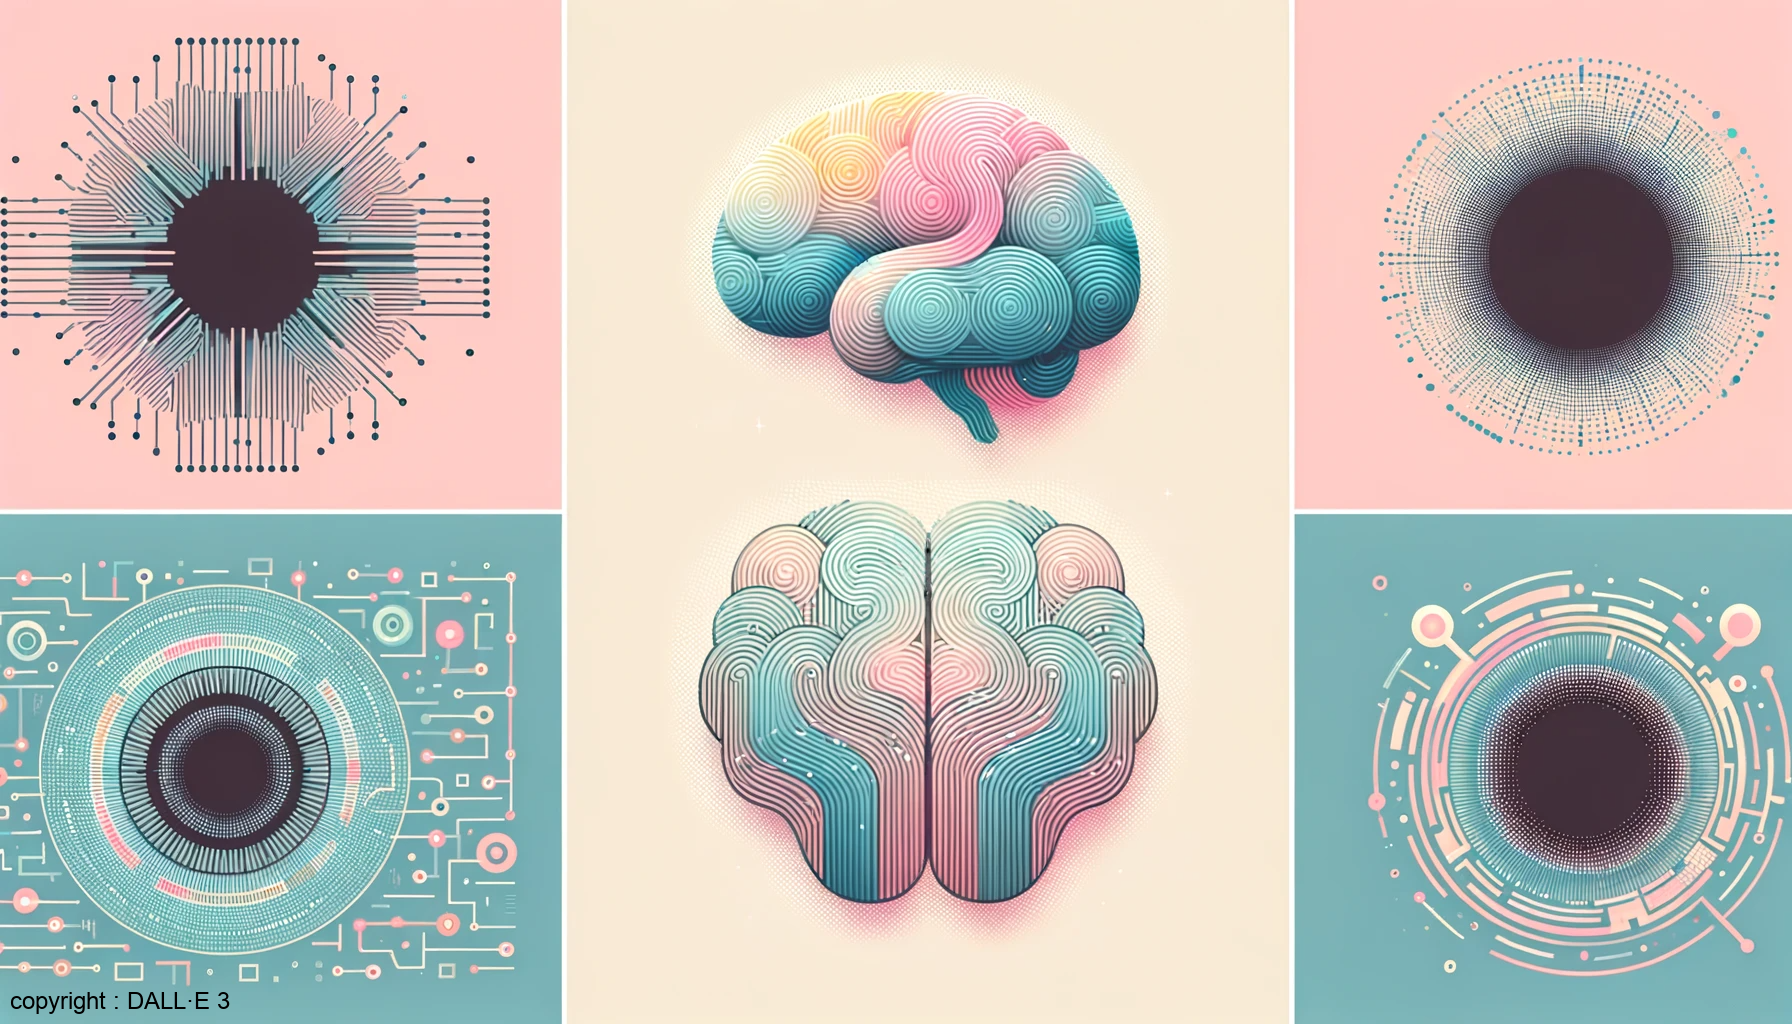 Abstract-representation-of-a-digital-brain-in-soft-pastel-colors-symbolizing-artificial.png